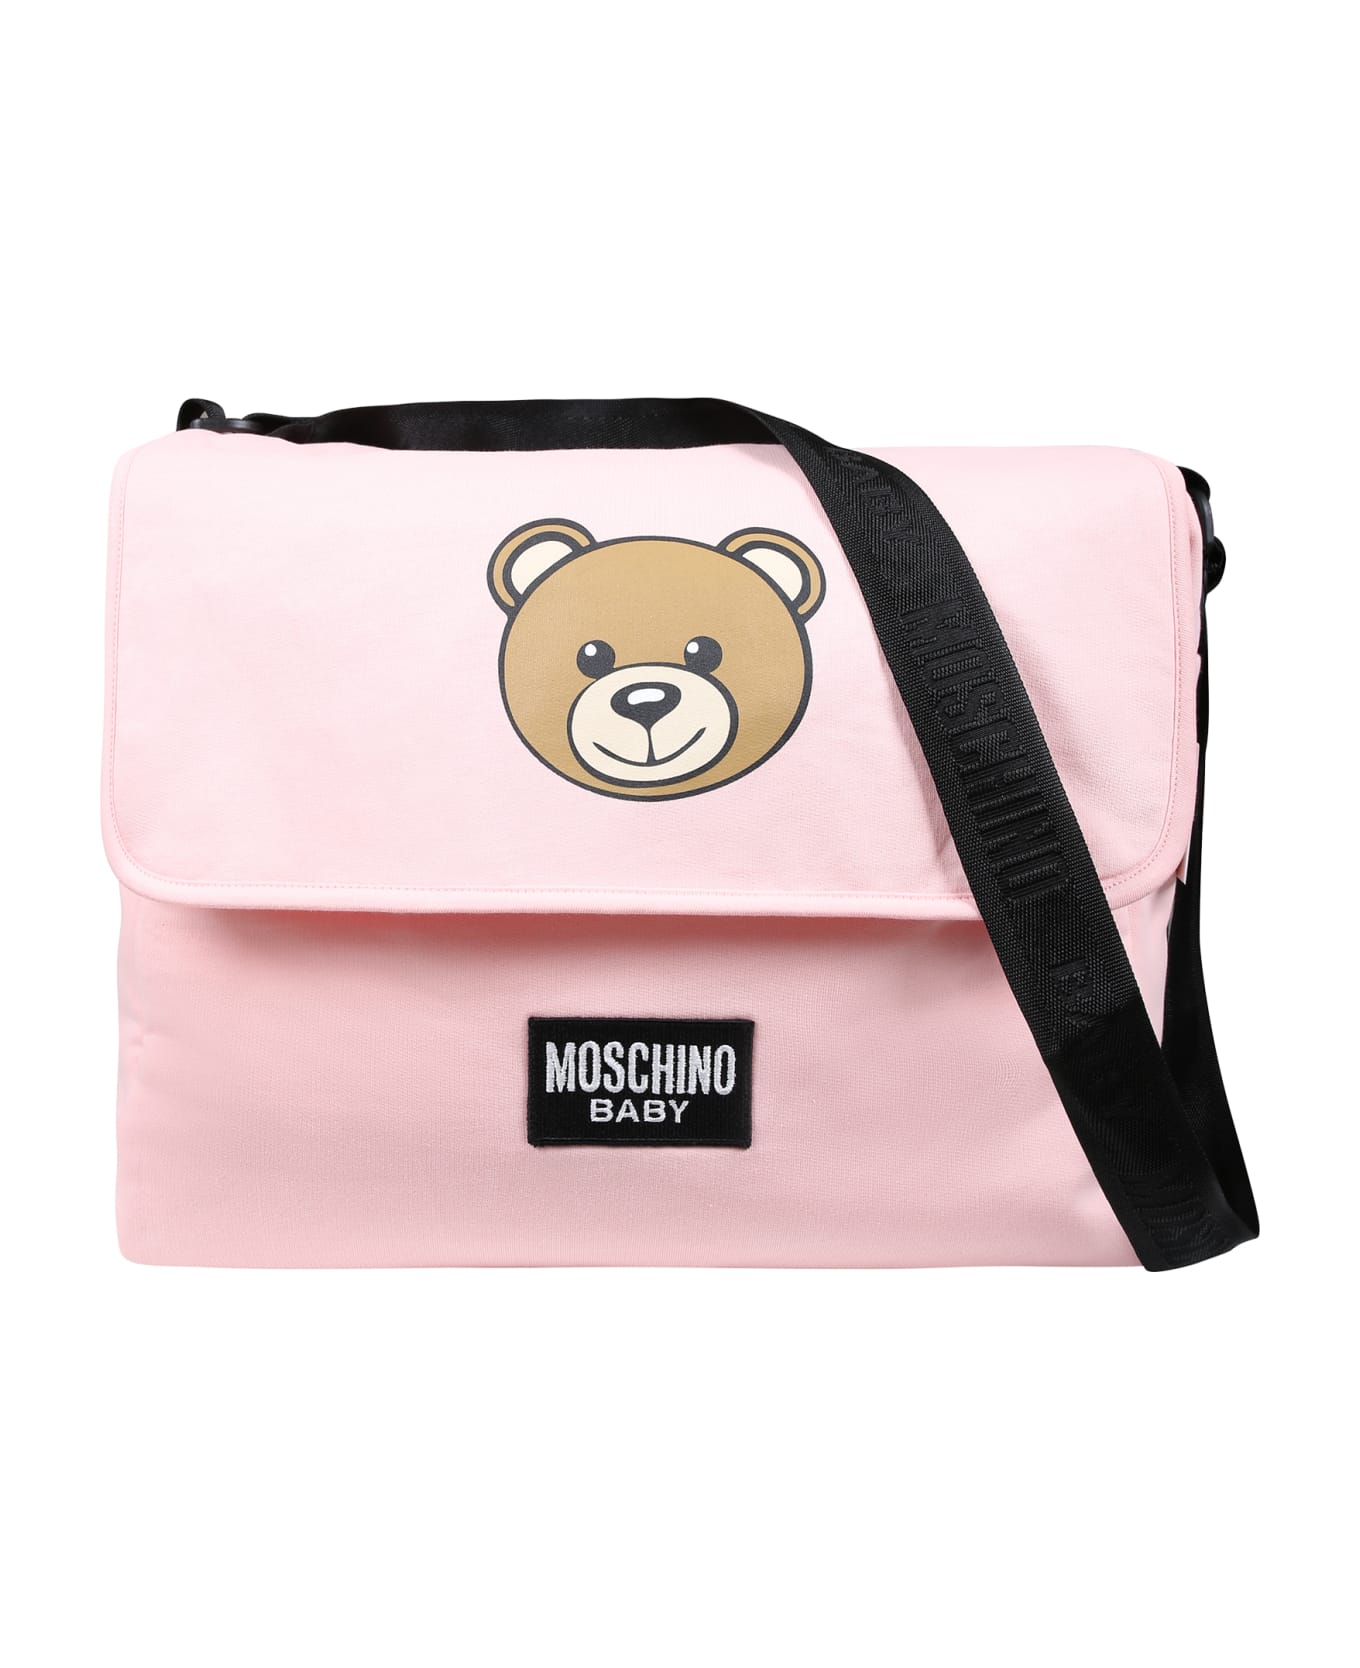 Moschino Pink Mother Bag For Baby Boy With Teddy Bear And Logo - Pink アクセサリー＆ギフト